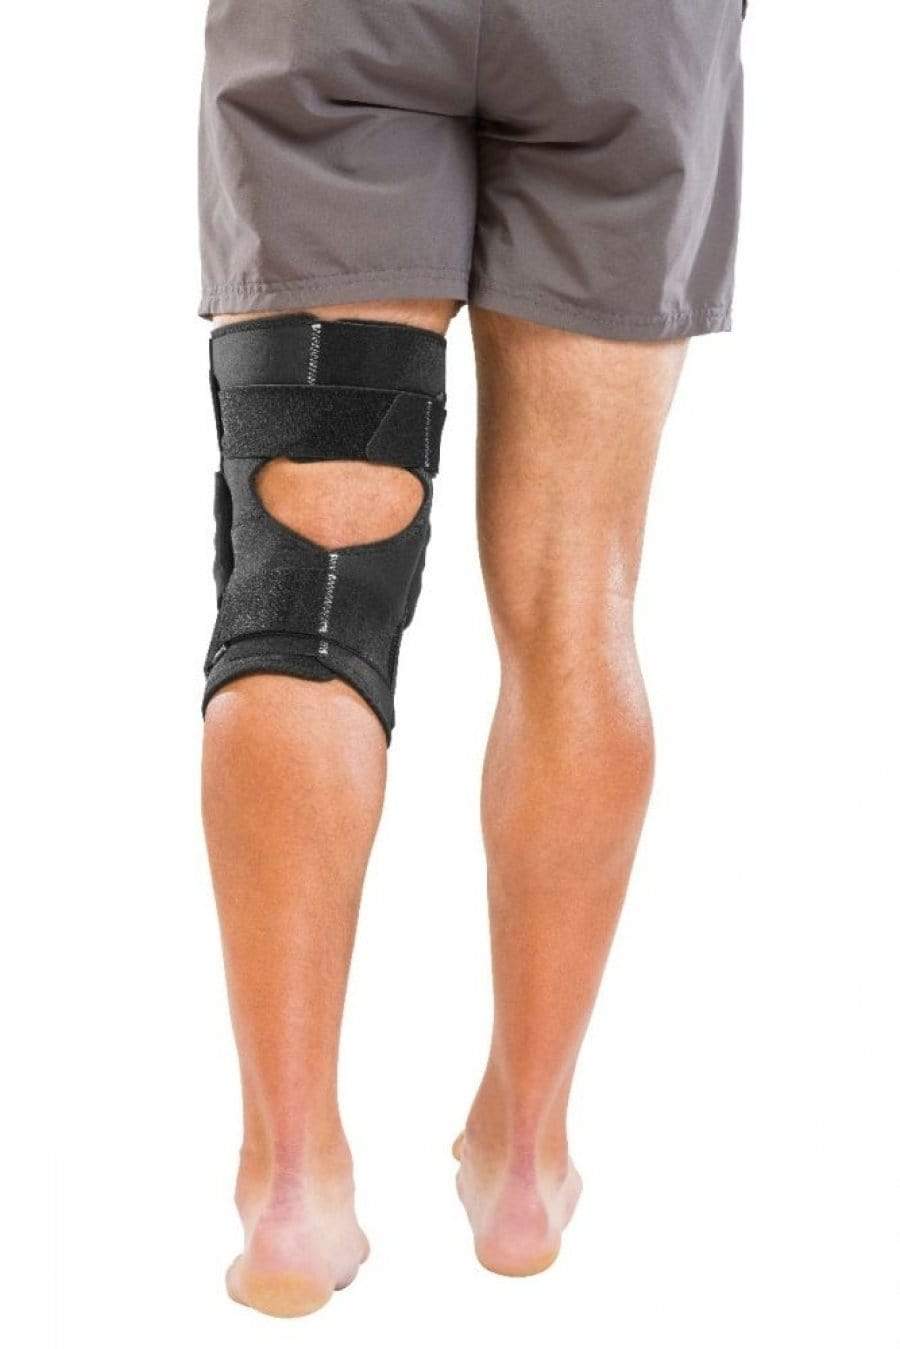 MUE5313 METAL TRIAXIAL HINGED WRAPAROUND KNEE BRACE WITH OPEN BACK